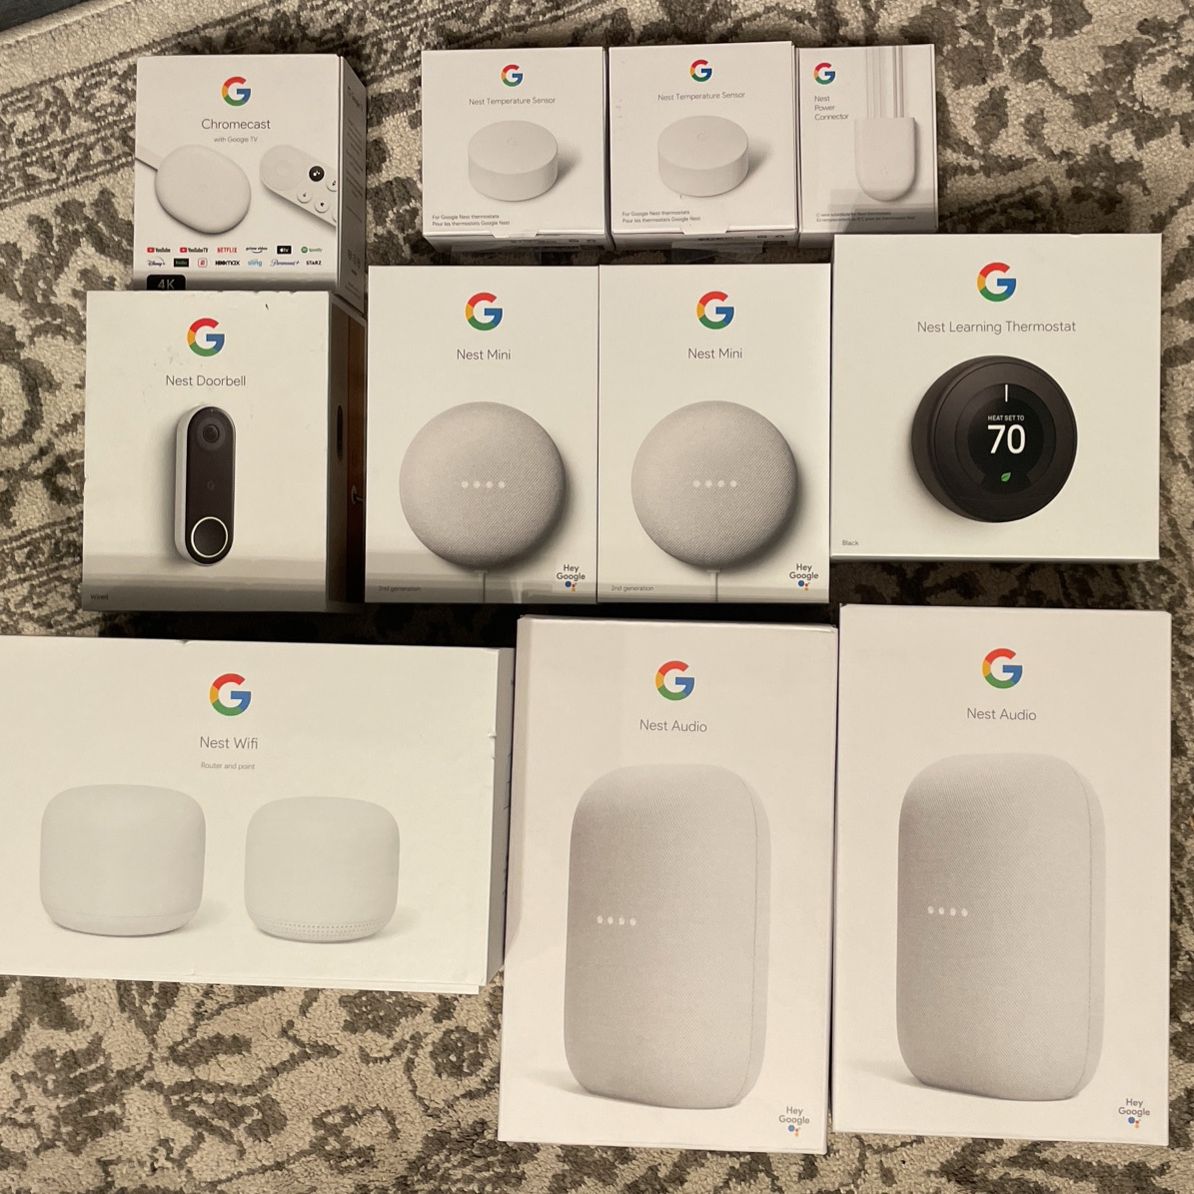 Google Nest Smart Home Devices  - Nearly $1000 New - Mesh Wi-Fi Router Thermostat Speakers Doorbell Chromecast